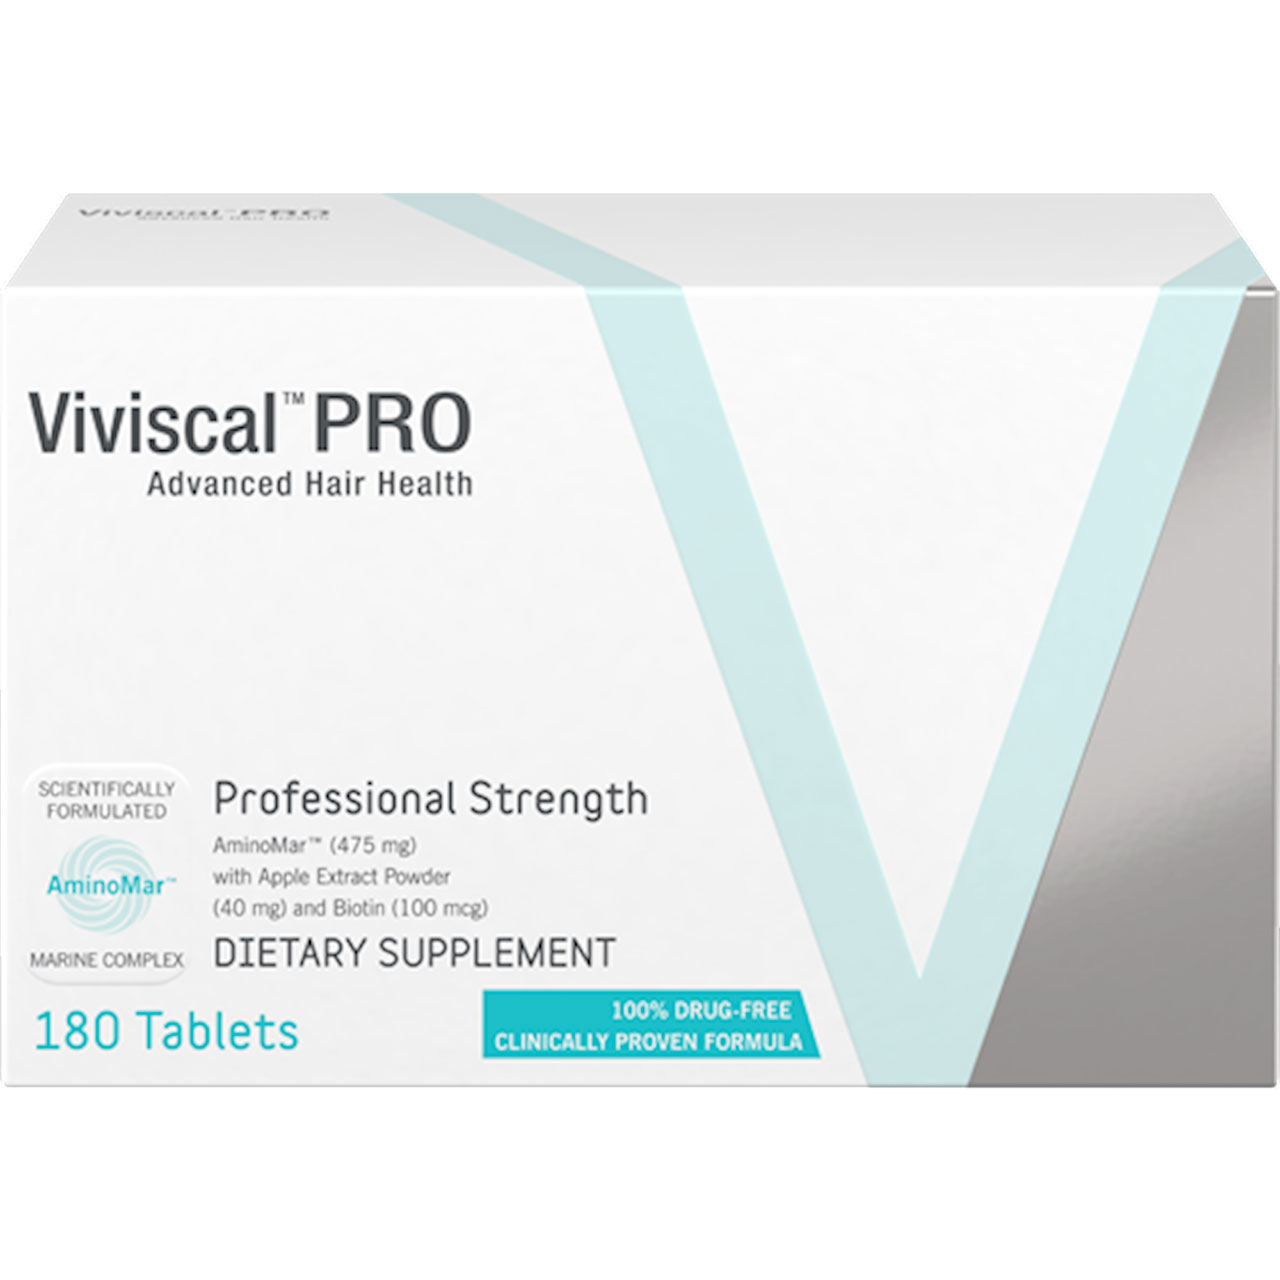 Viviscal Professional Hair Health - 180 Tablets Questions & Answers